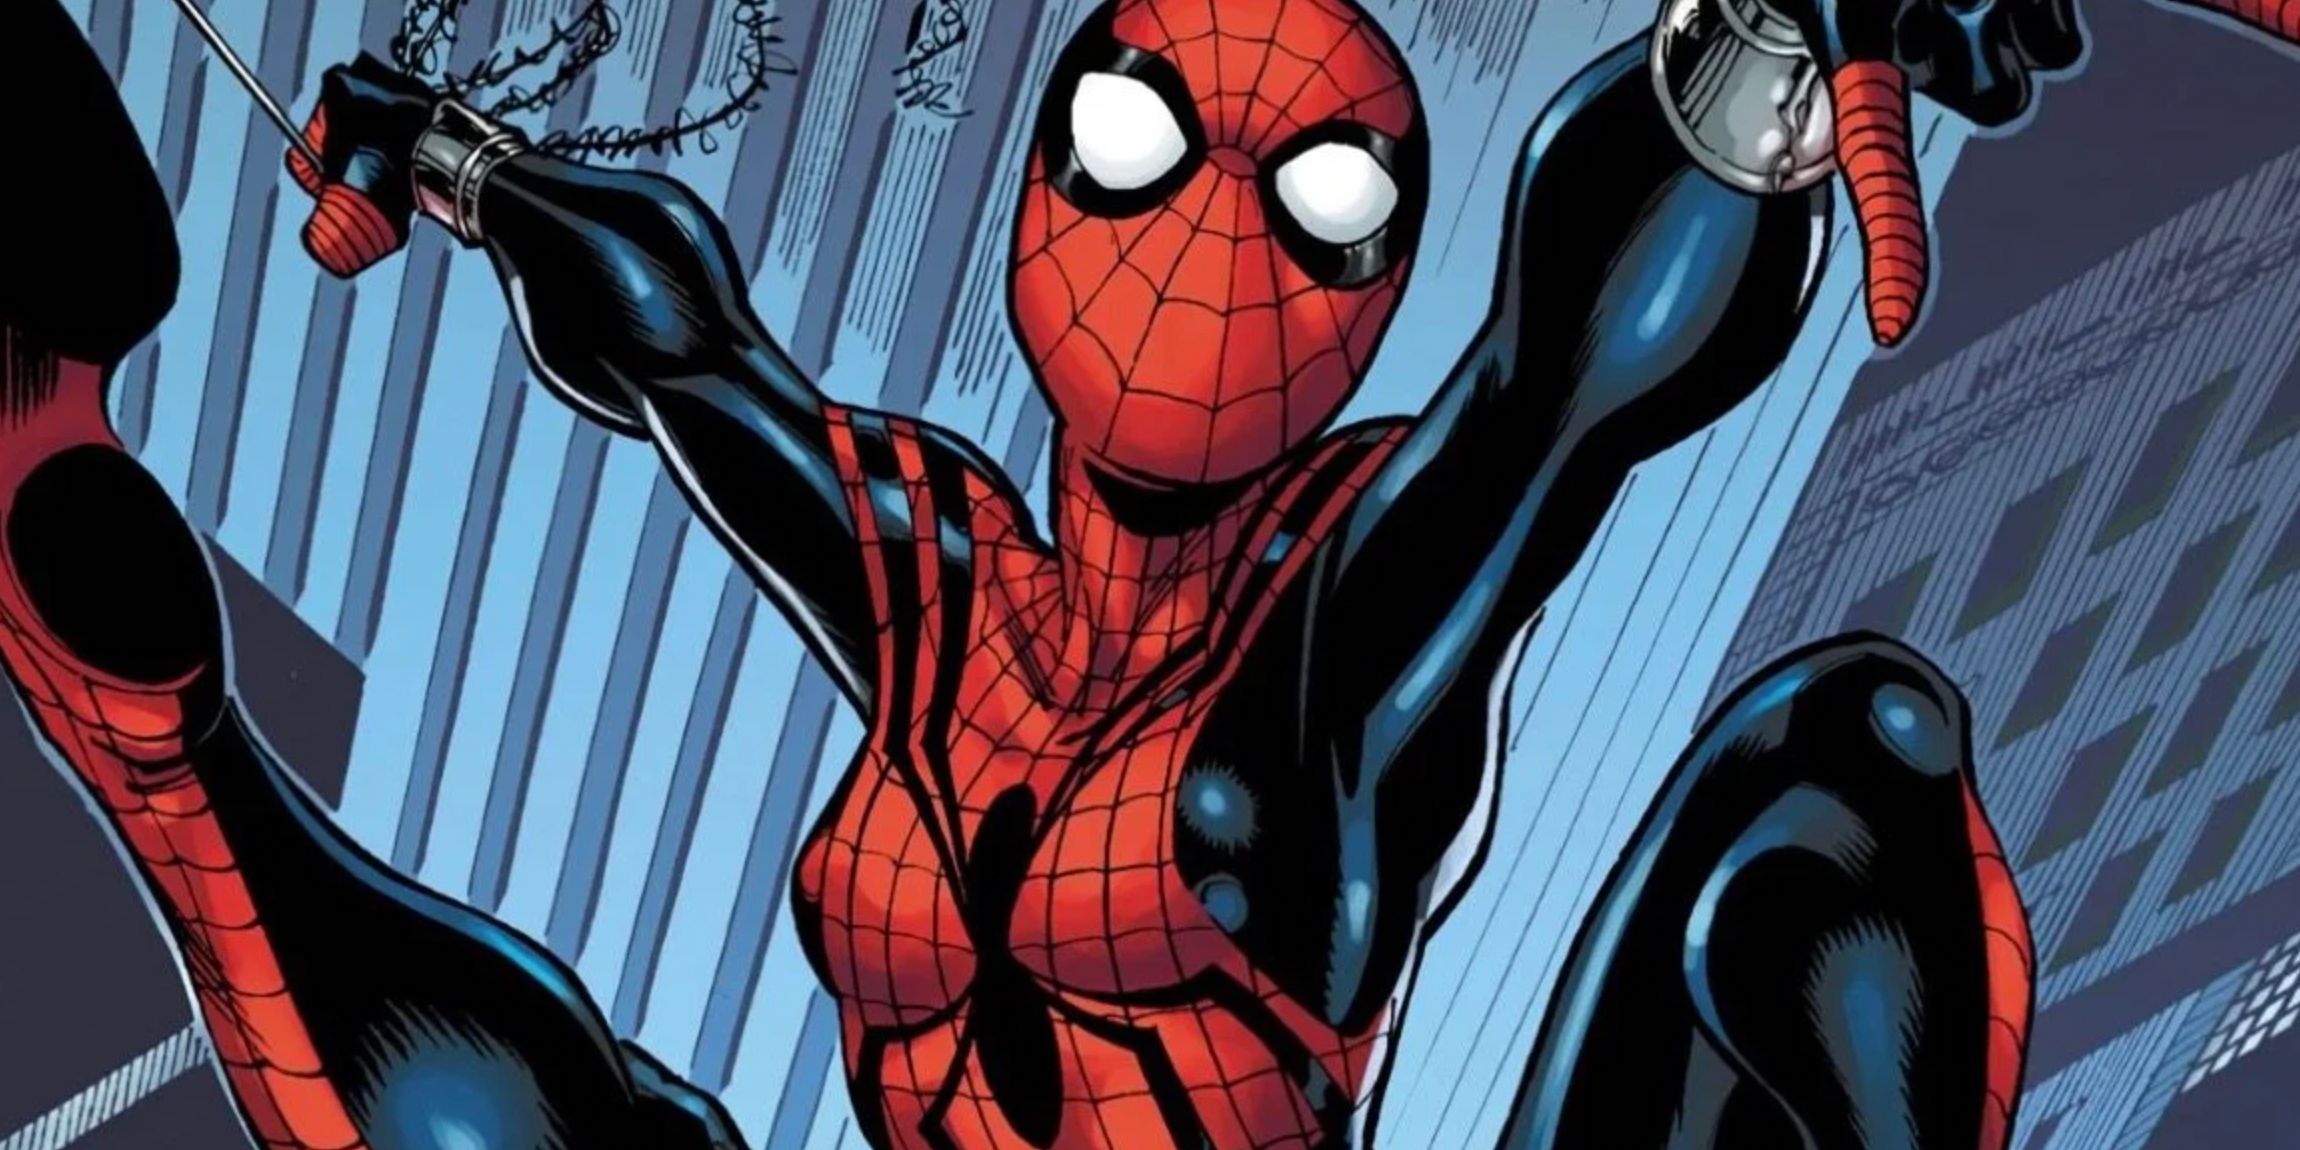 Mayday Parker swinging from her webs in Marvel comics